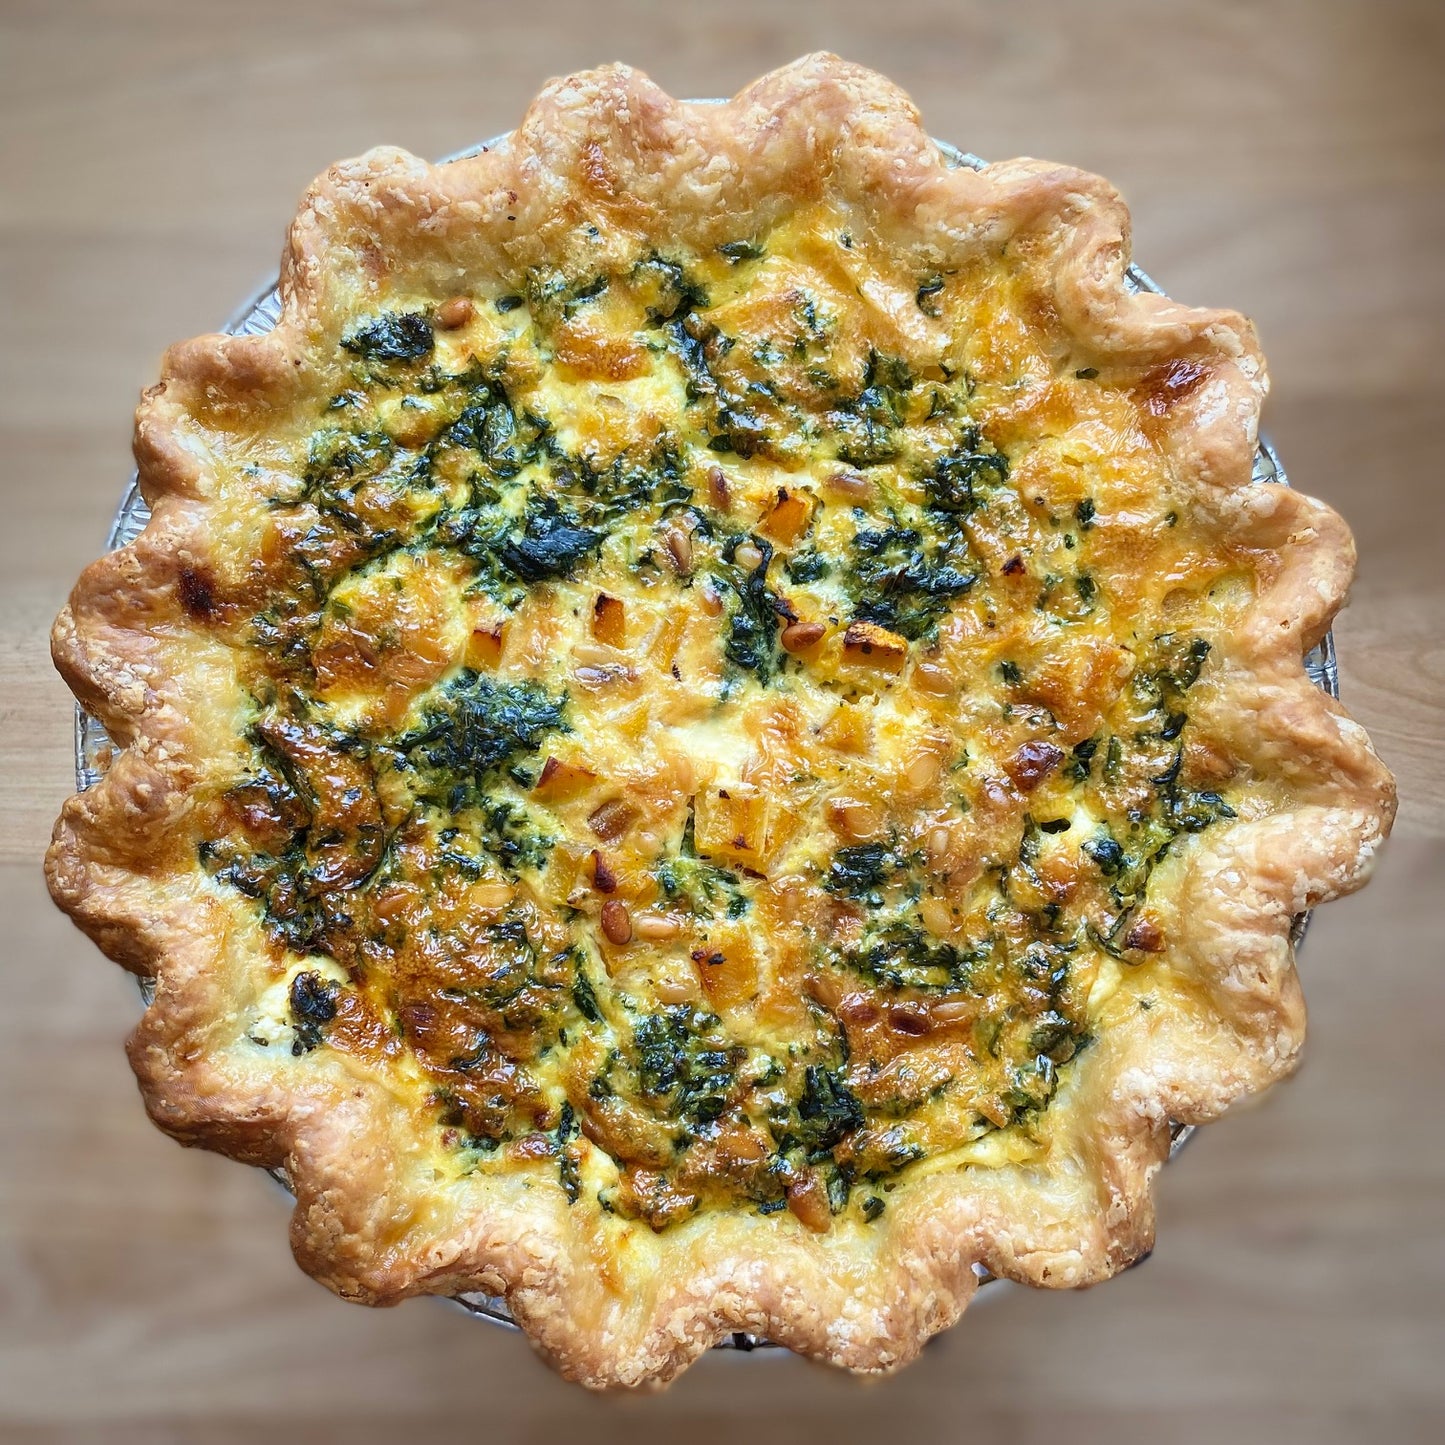 Quiche - Roasted Butternut Squash, Spinach, Goat Cheese & Toasted Pine Nuts (veg)